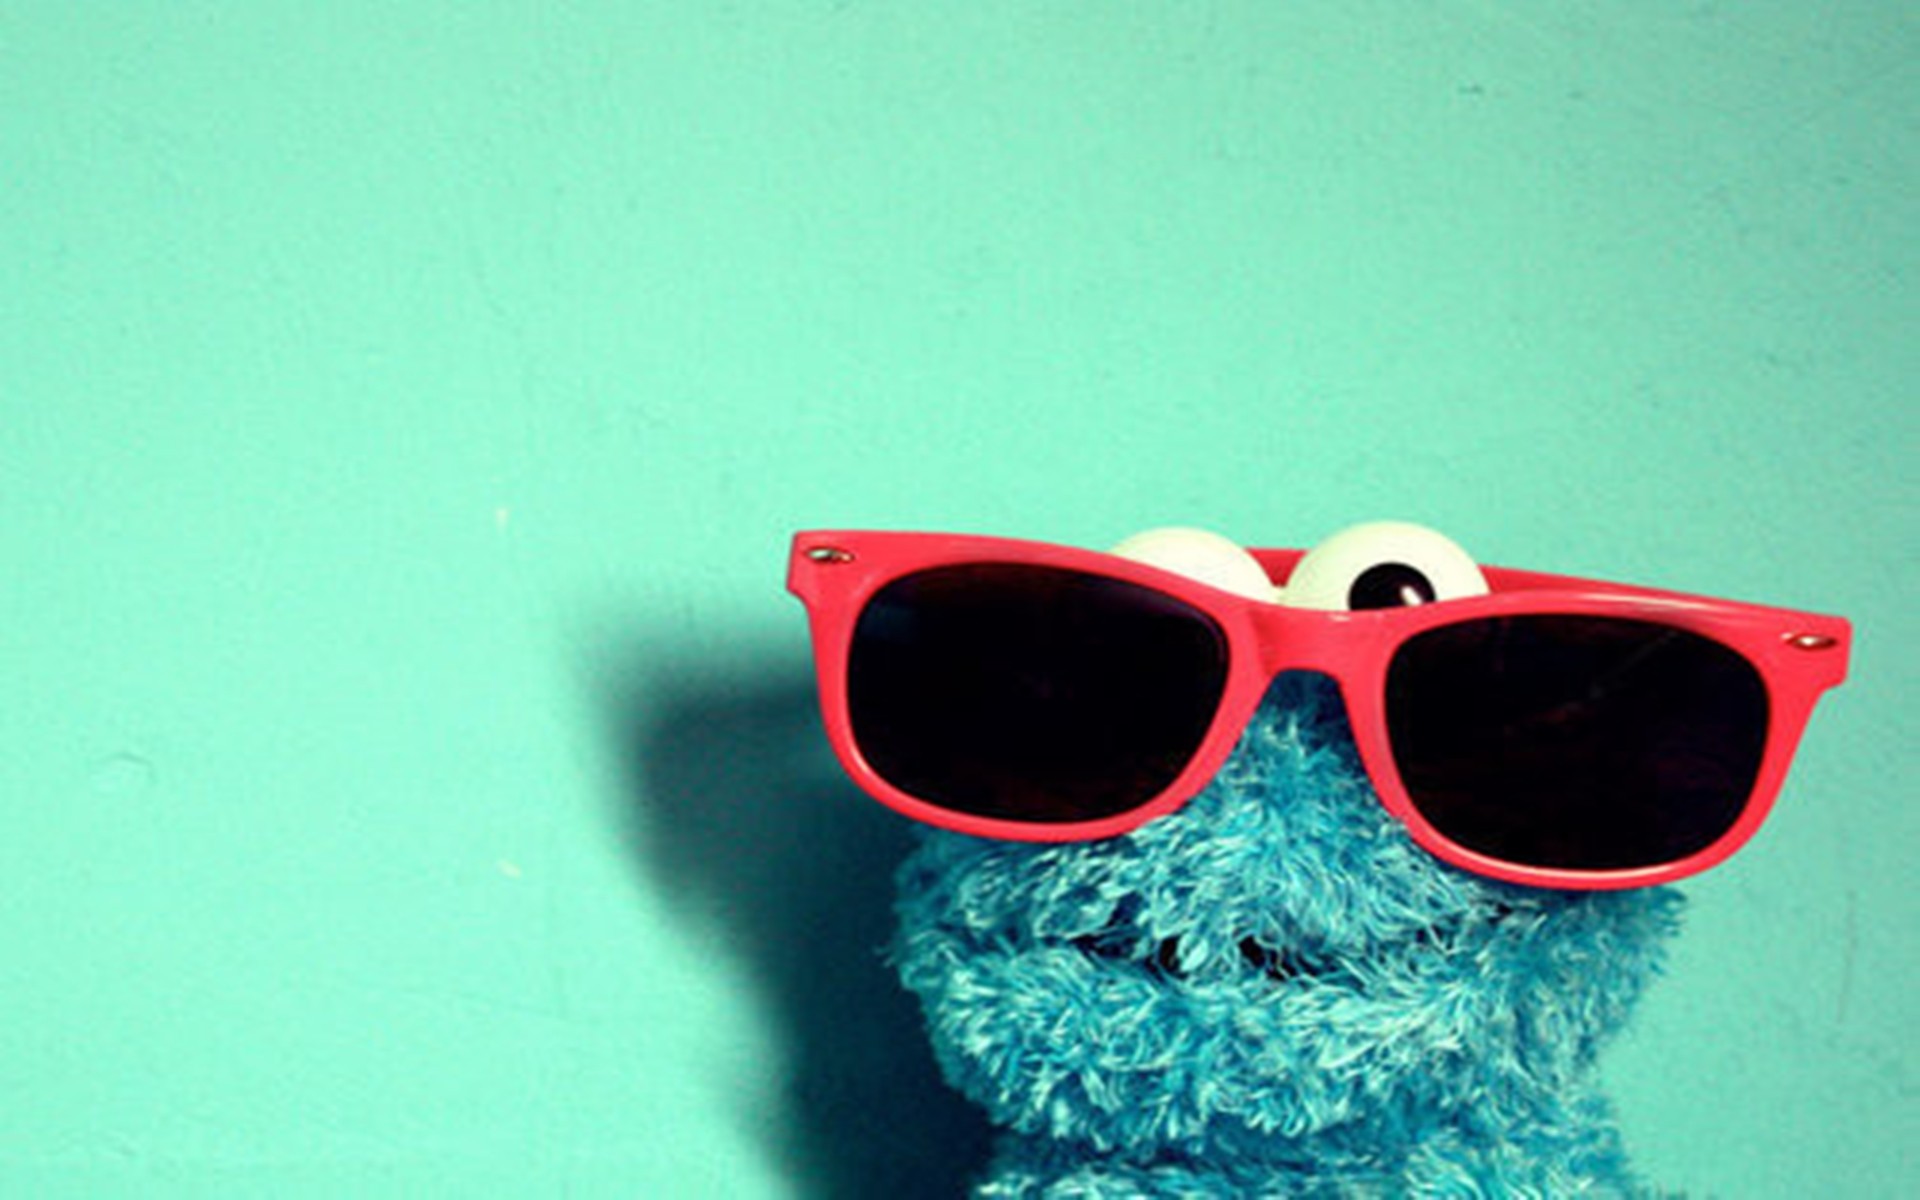 HD Cookie Monster Wallpapers and Photos | HD Cartoons Wallpapers